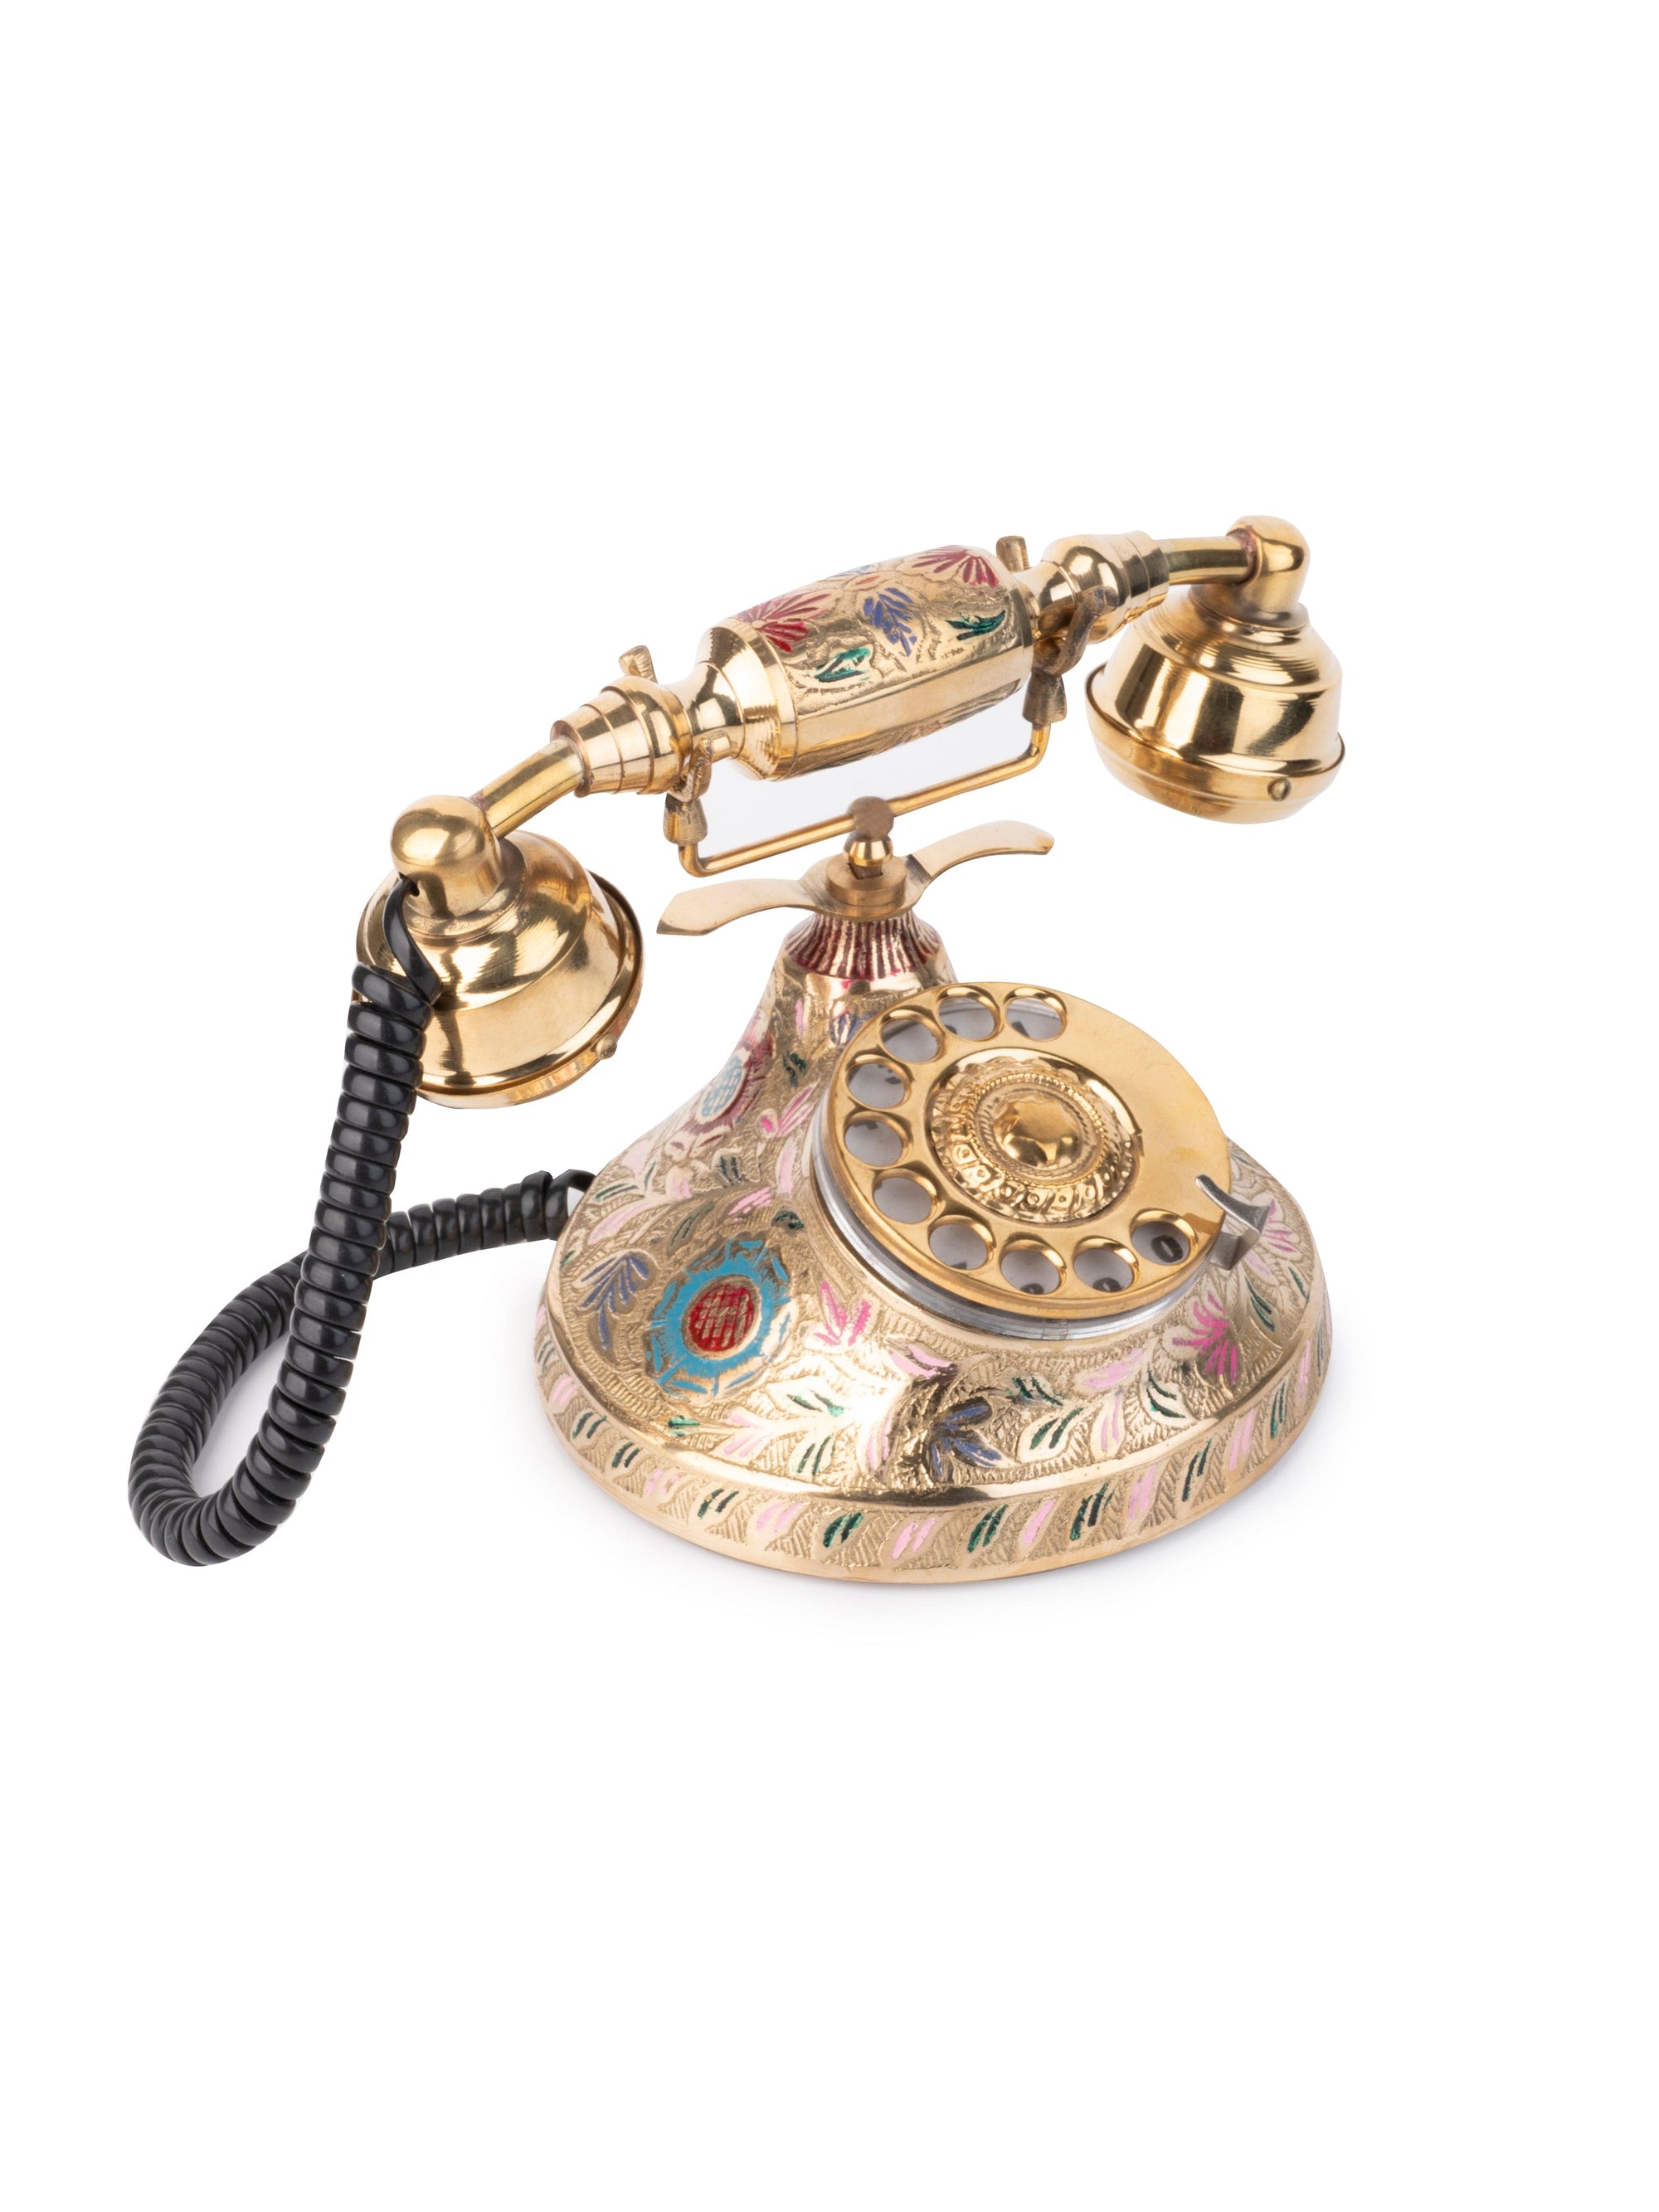 Brass Crafted Colorful Retro Landline Phone for Home and Office Decor